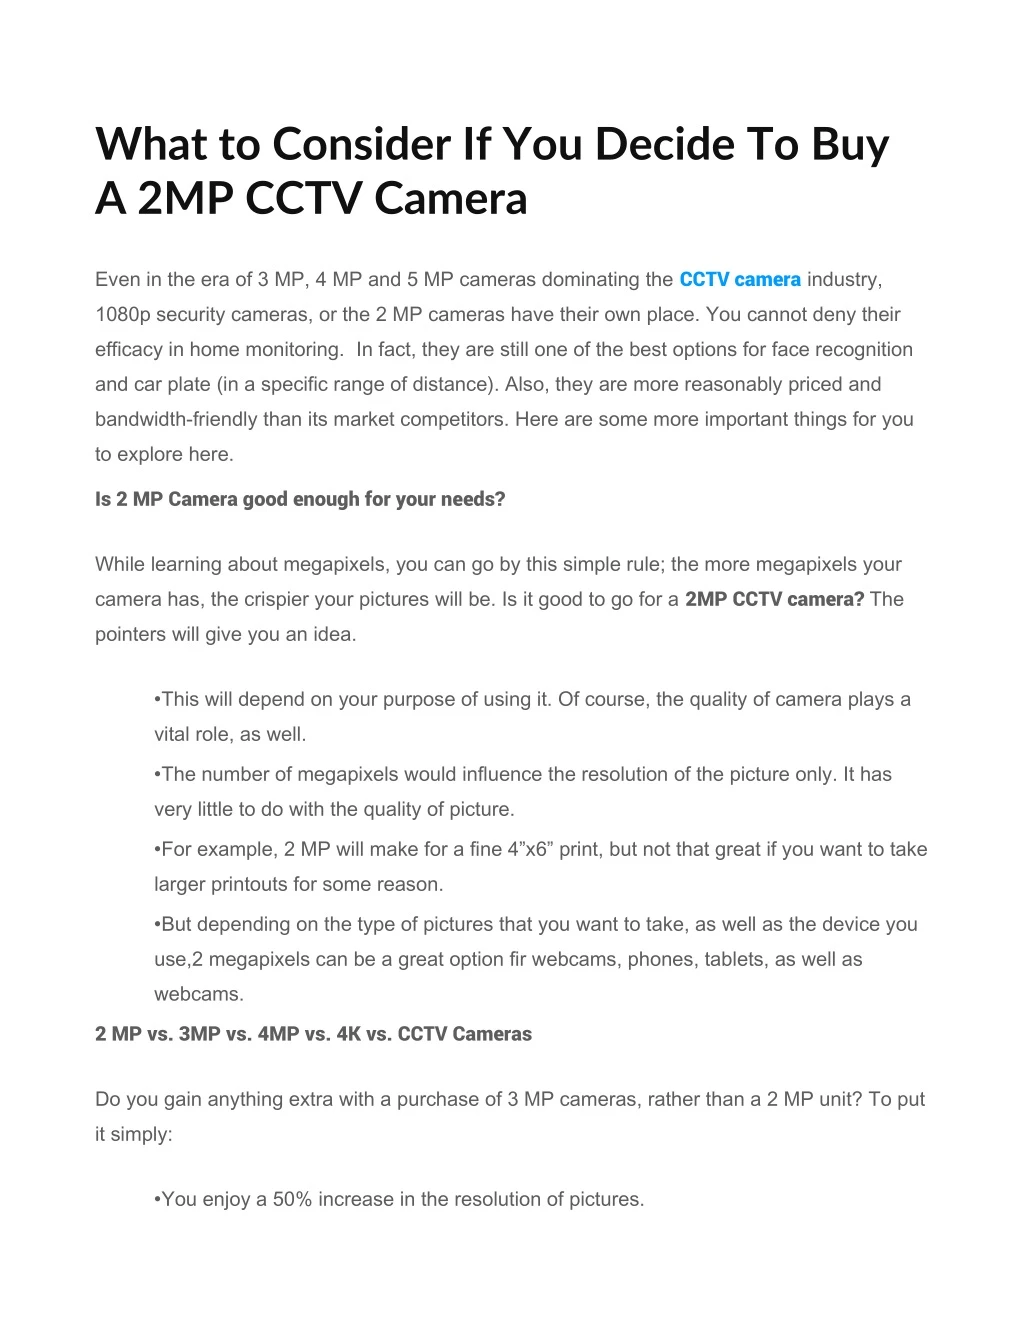 what to consider if you decide to buy a 2mp cctv